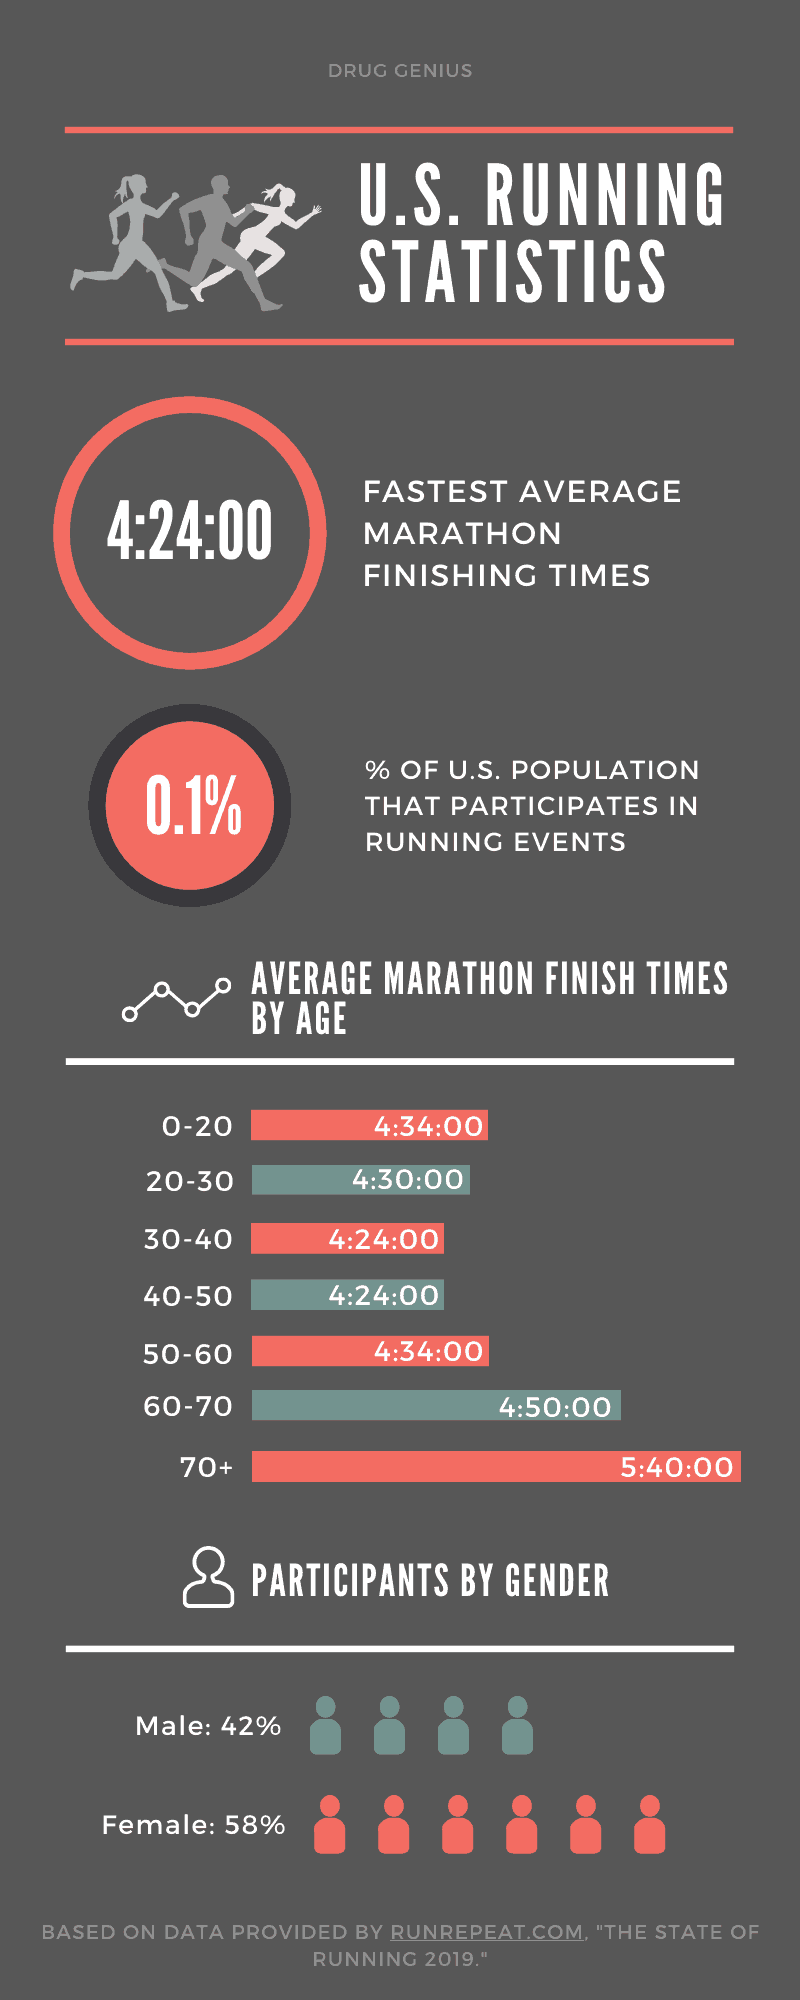 Infographic on statistics of running and runners in the United States.